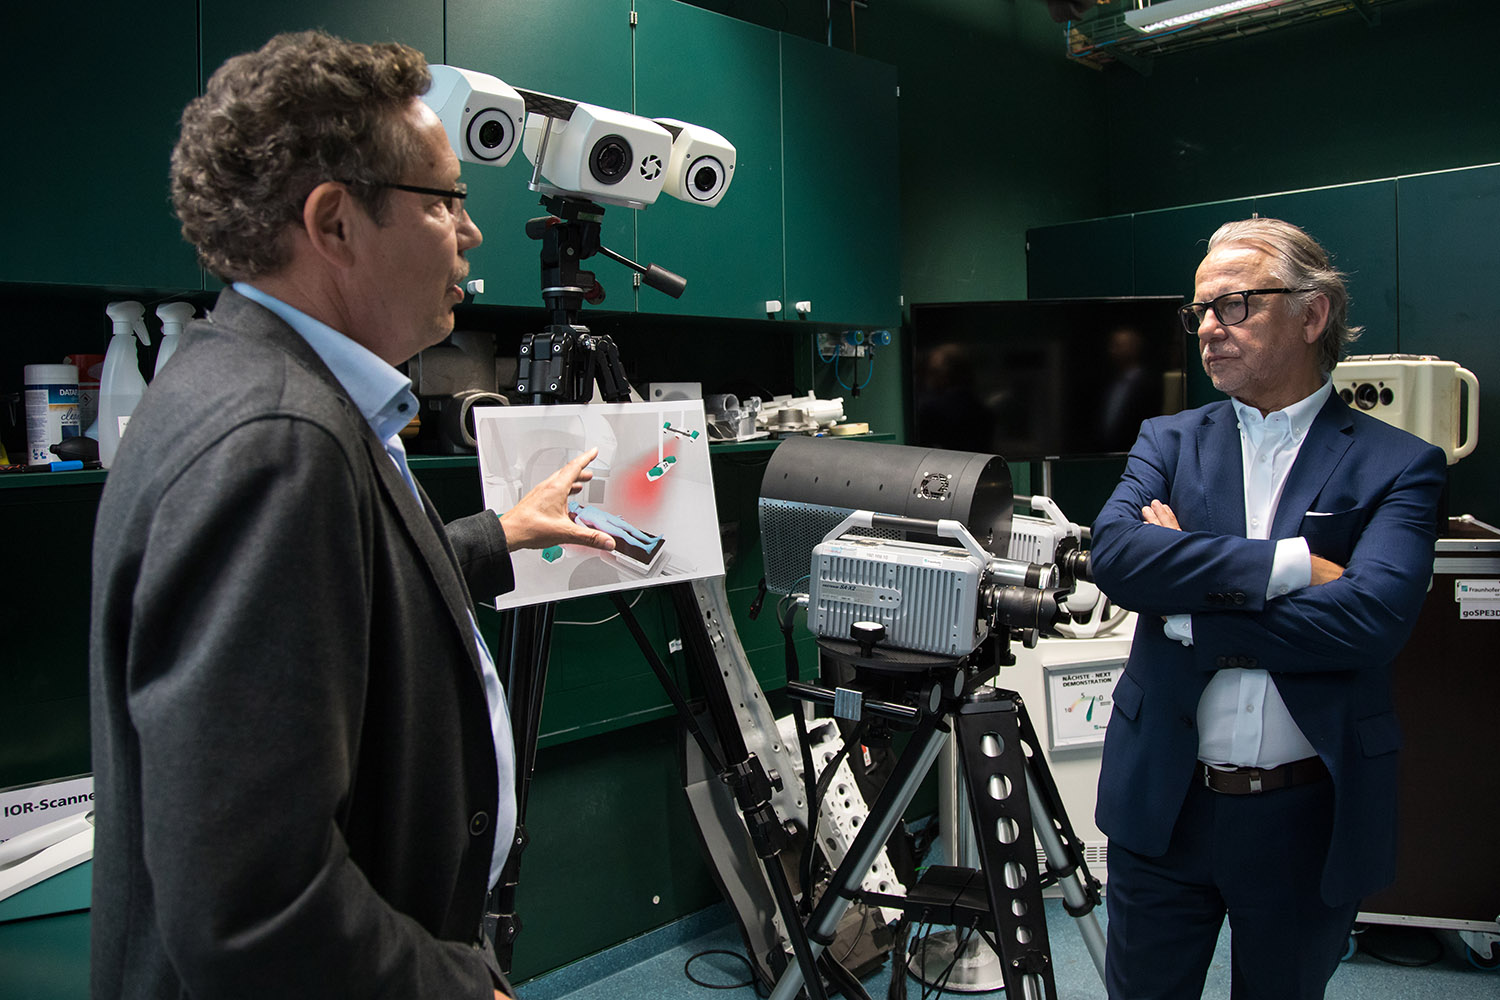 Prof. Dr. Gunther Notni (left) of Fraunhofer IOF together with Hans-Peter Hiepe (BMBF) with 3D measurement technology, the fundamentals of which were developed within the framework of the 3Dsensation research alliance.